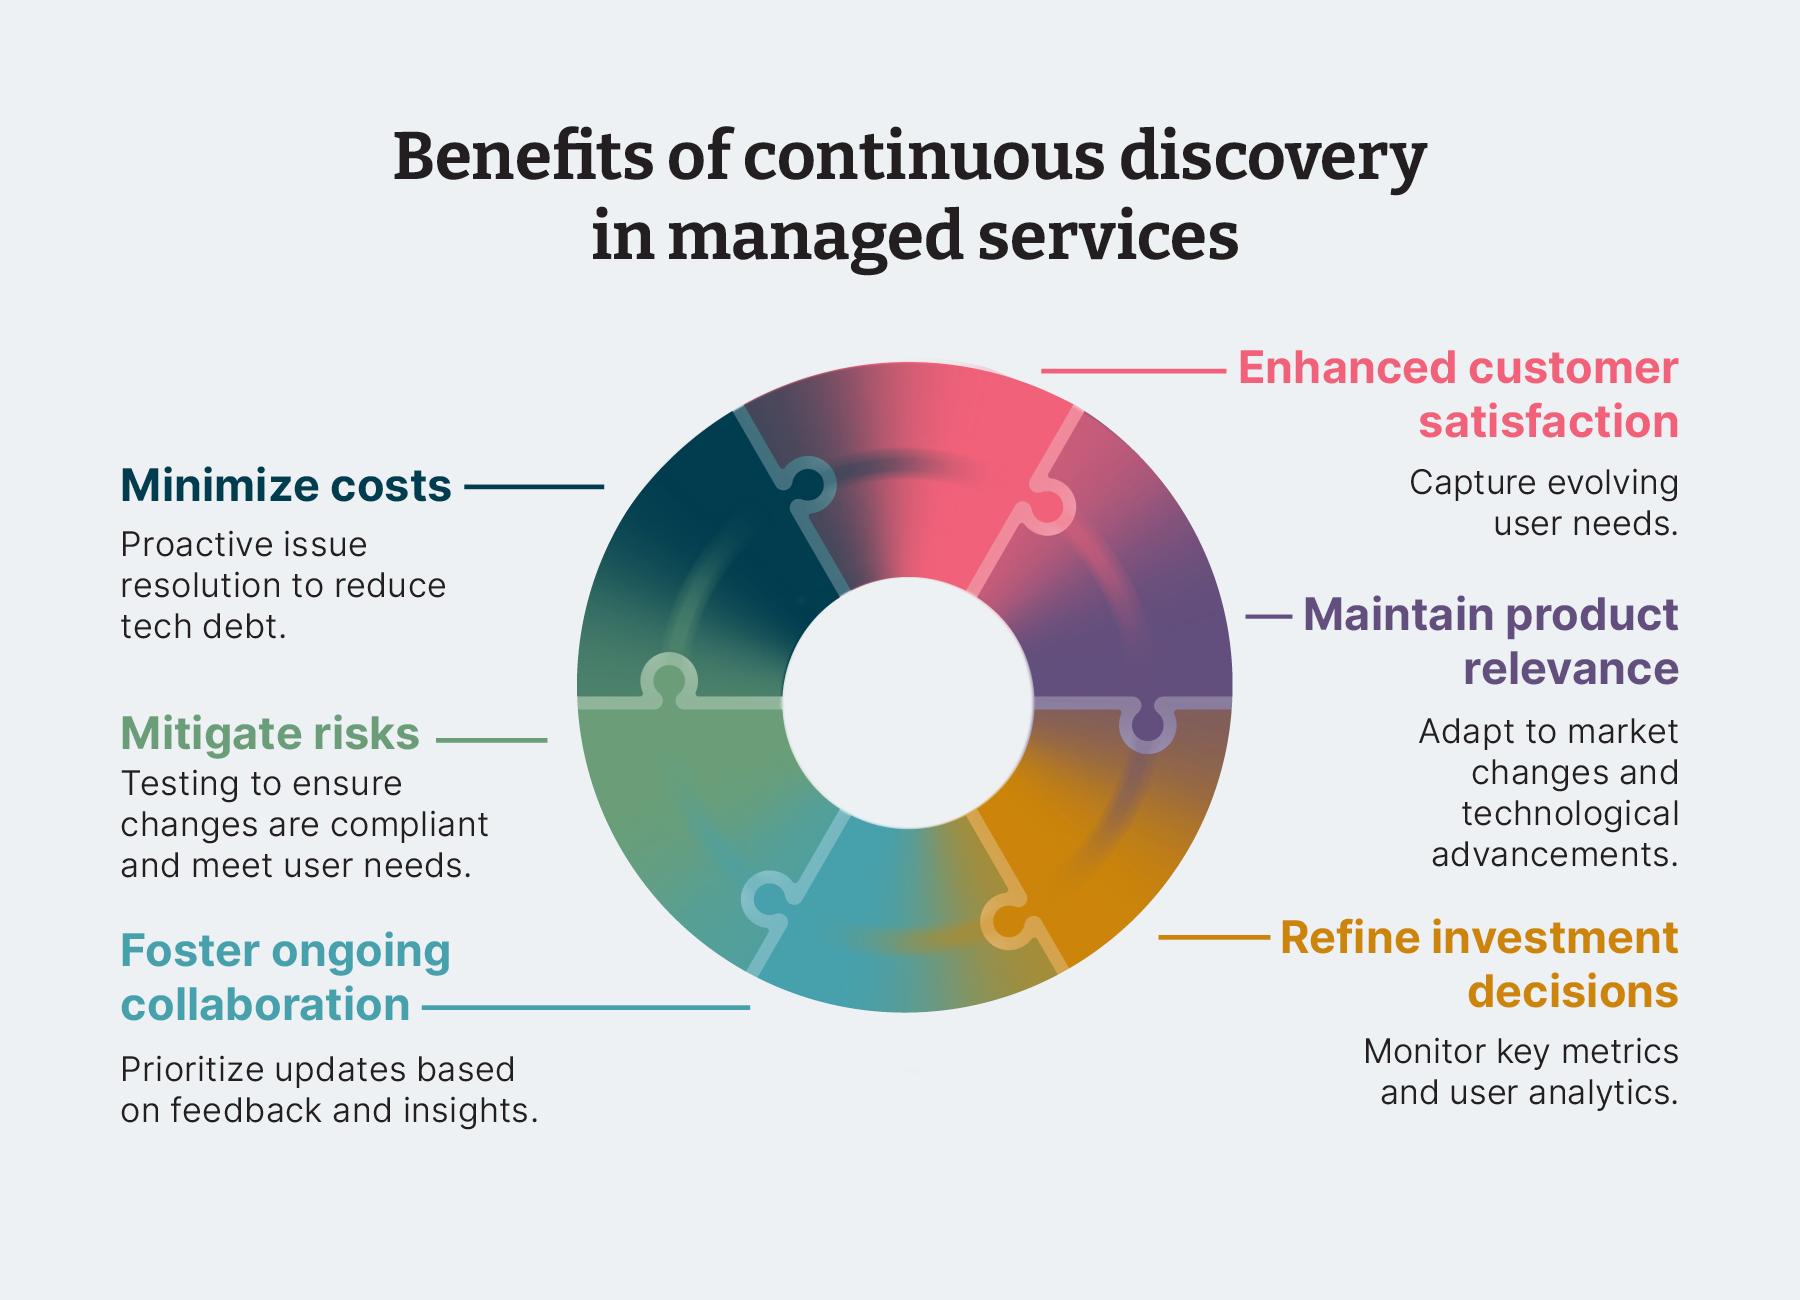 Benefits of continuous discovery in Managed Services: Enhanced customer satisfaction, Maintain product relevance, Refine investment decisions, Foster ongoing collaboration, Mitigate risks and Minimize costs